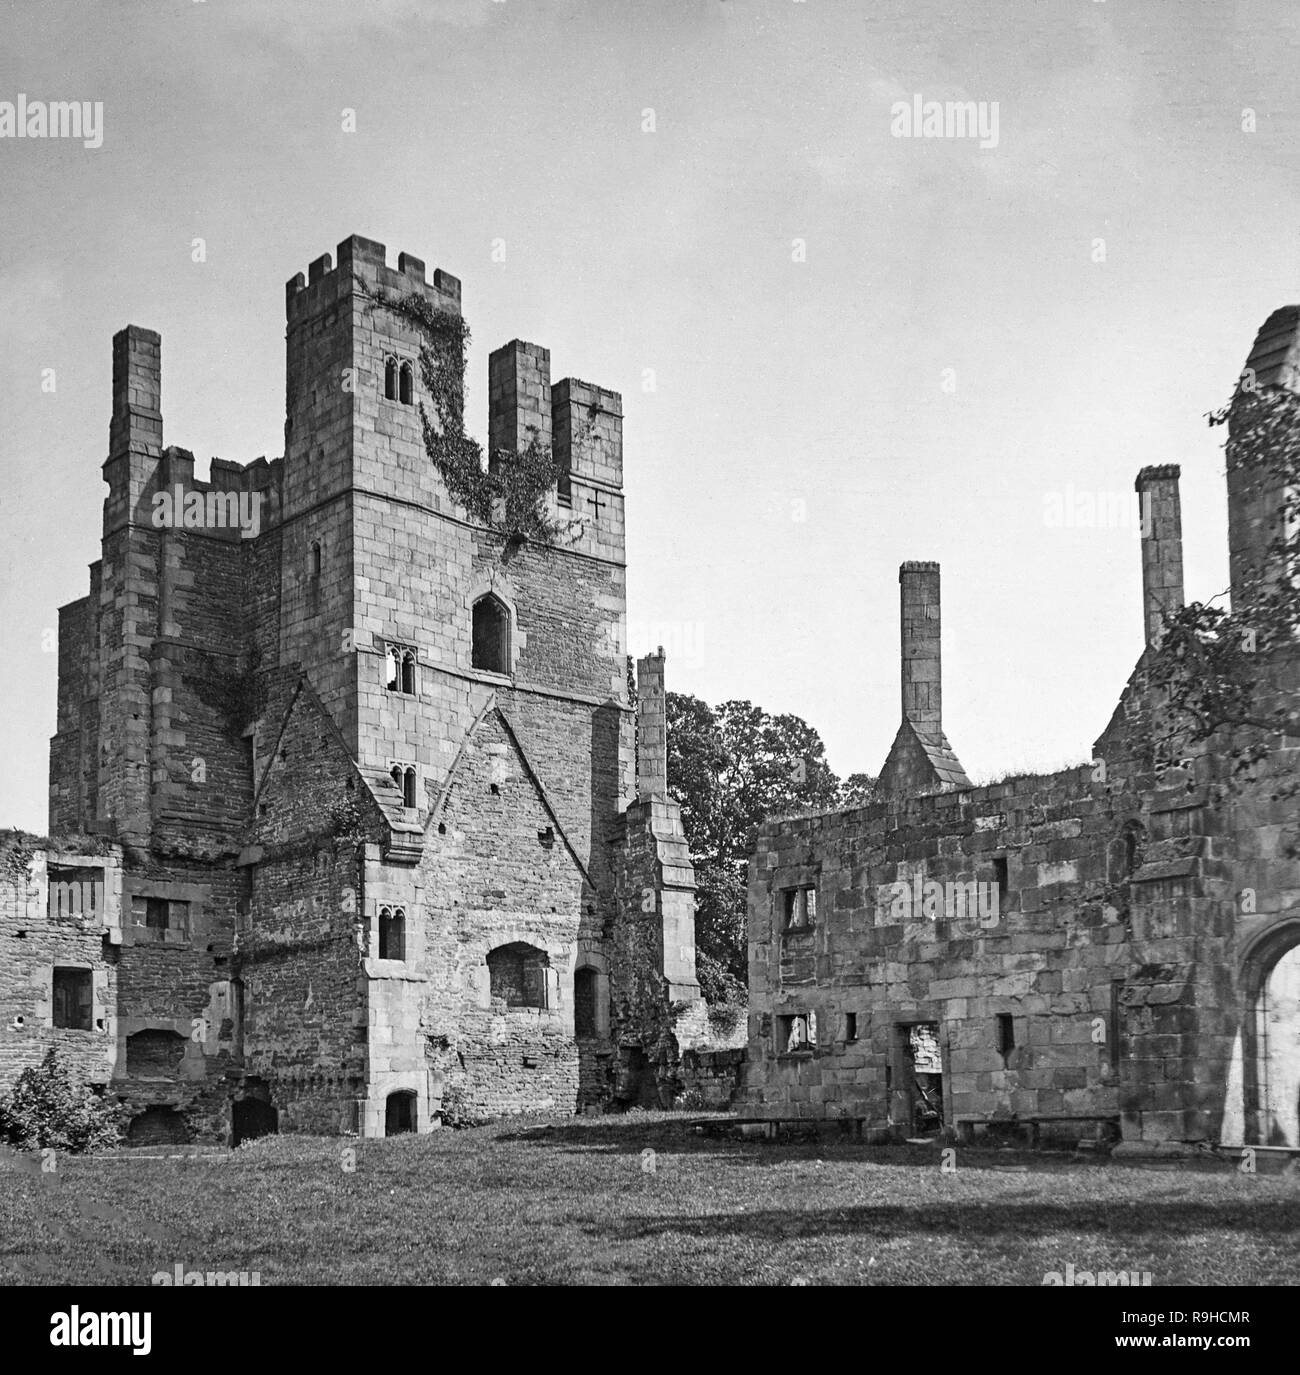 A late Victorian black and white photograph showing the ruins of Winfield Manor, near the town of Alfreton in Derbyshire, England.This monument to late medieval ‘conspicuous consumption’ was built in the 1440s for the wealthy Ralph, Lord Cromwell, Treasurer of England. Later the home of Bess of Hardwick’s husband, the Earl of Shrewsbury, who imprisoned Mary Queen of Scots here in 1569, 1584 and 1585. Stock Photo